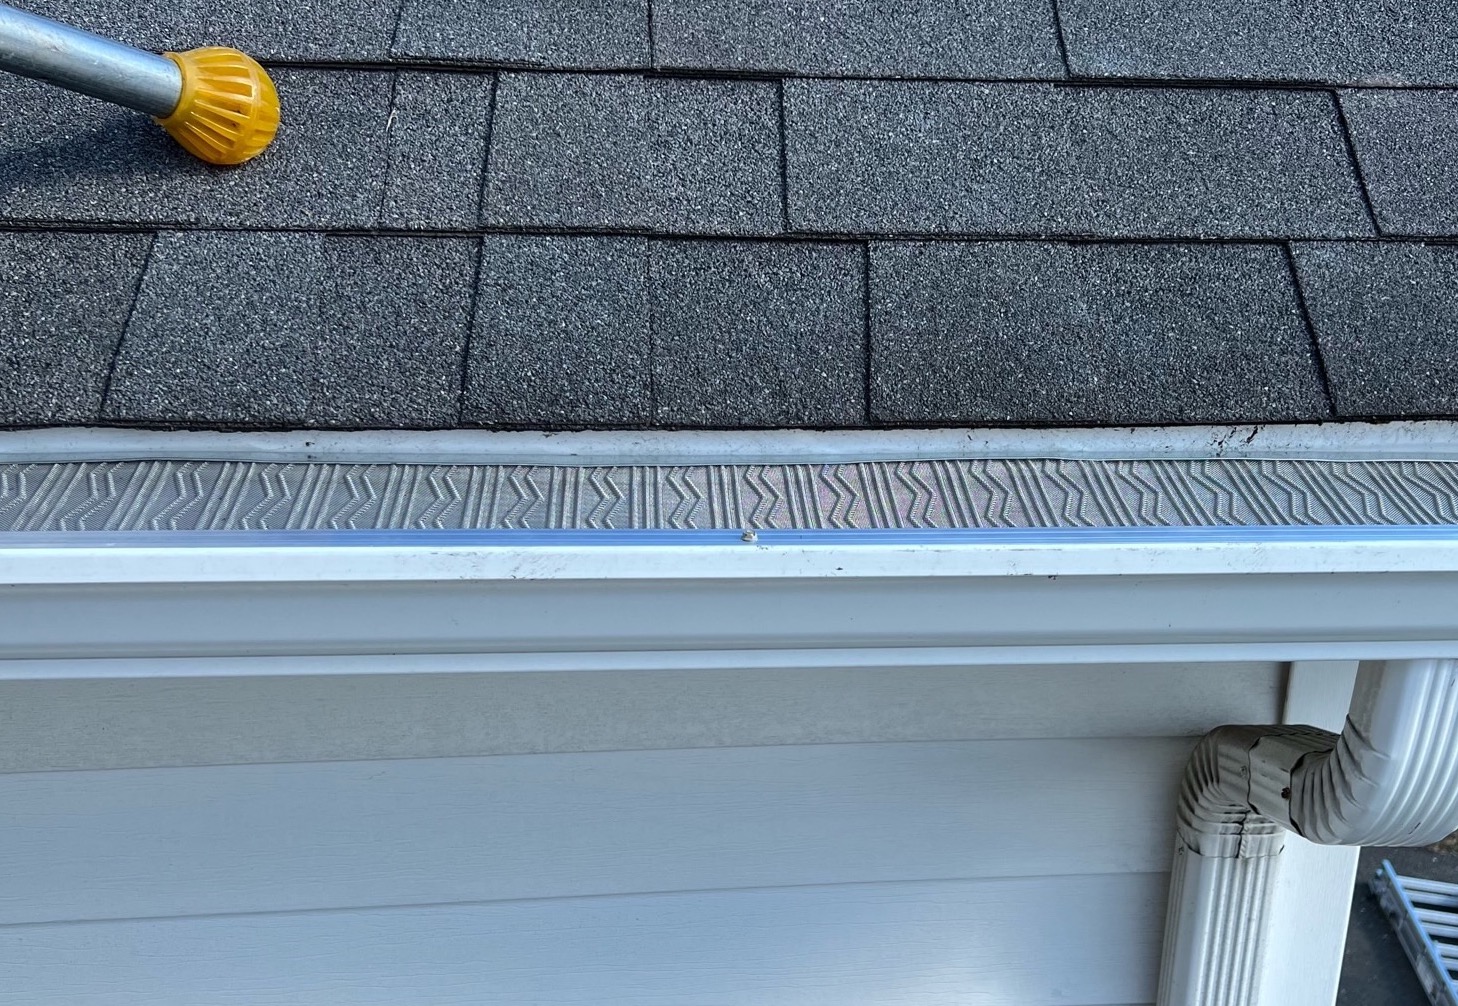 Gutter cleaning services are not necessary with gutter screens that protect from debris, insects, grit, and needles - Best gutter contractor near me in Stamford, Norwalk, Westport, Wilton, Weston, Easton, Fairfield, Trumbull, Stratford, Milford, New Canaan, Connecticut